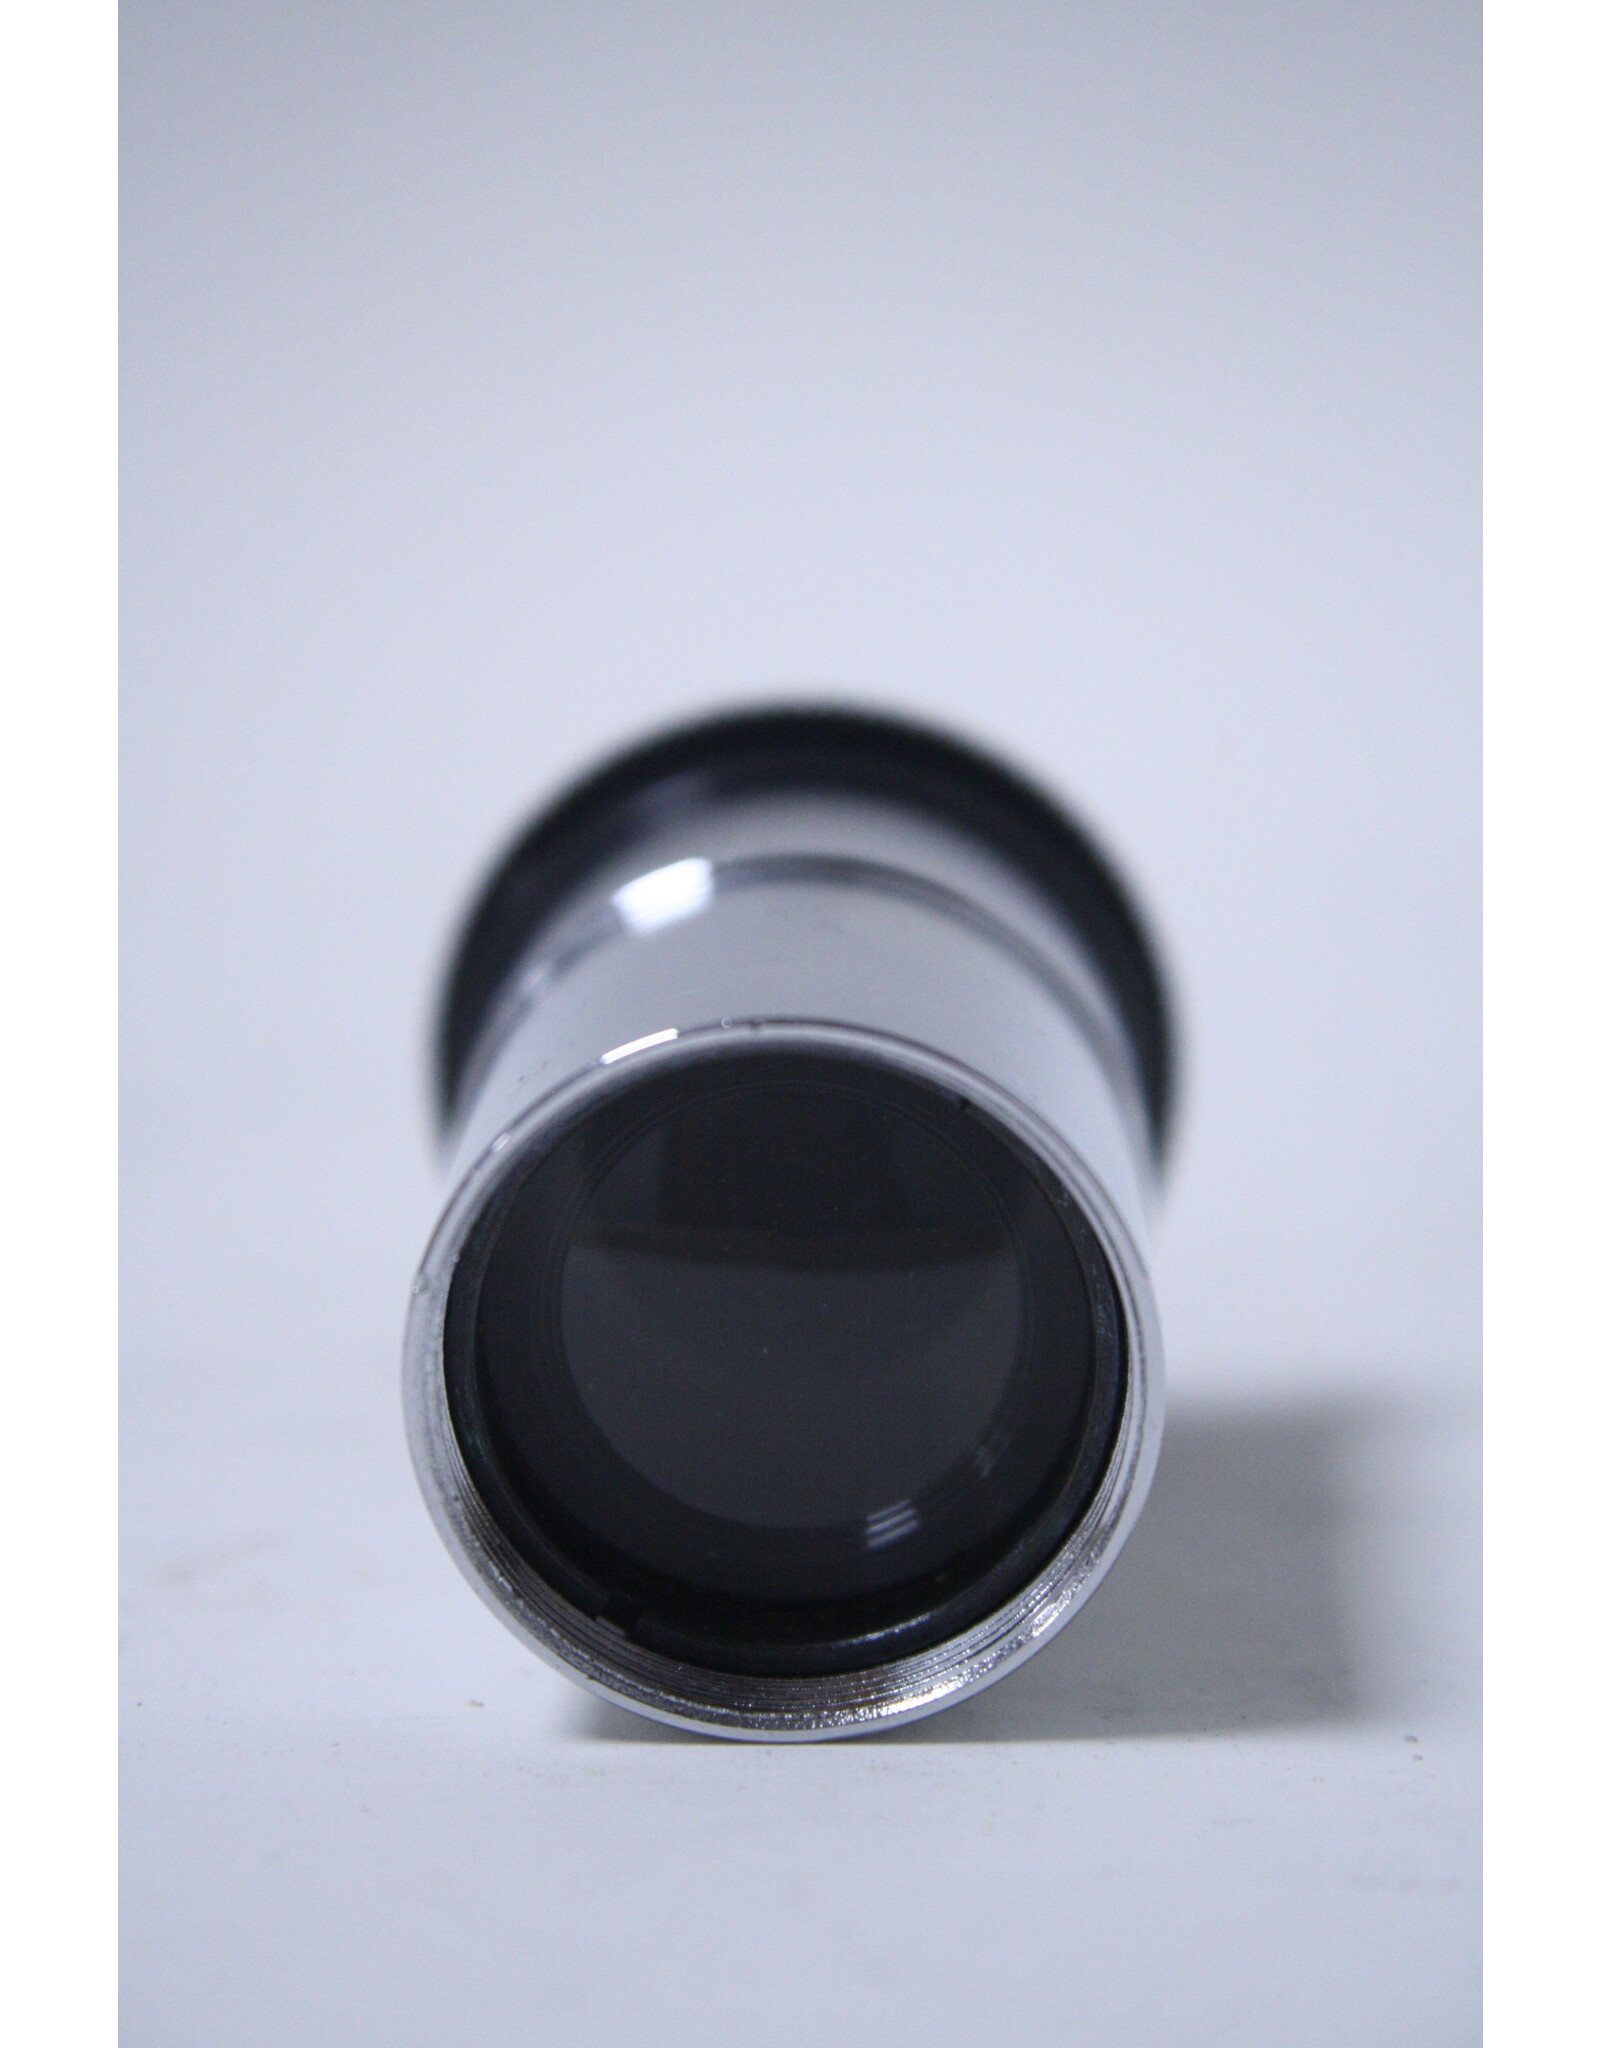 H25 25mm Eyepiece .965 Inch (Pre-owned)